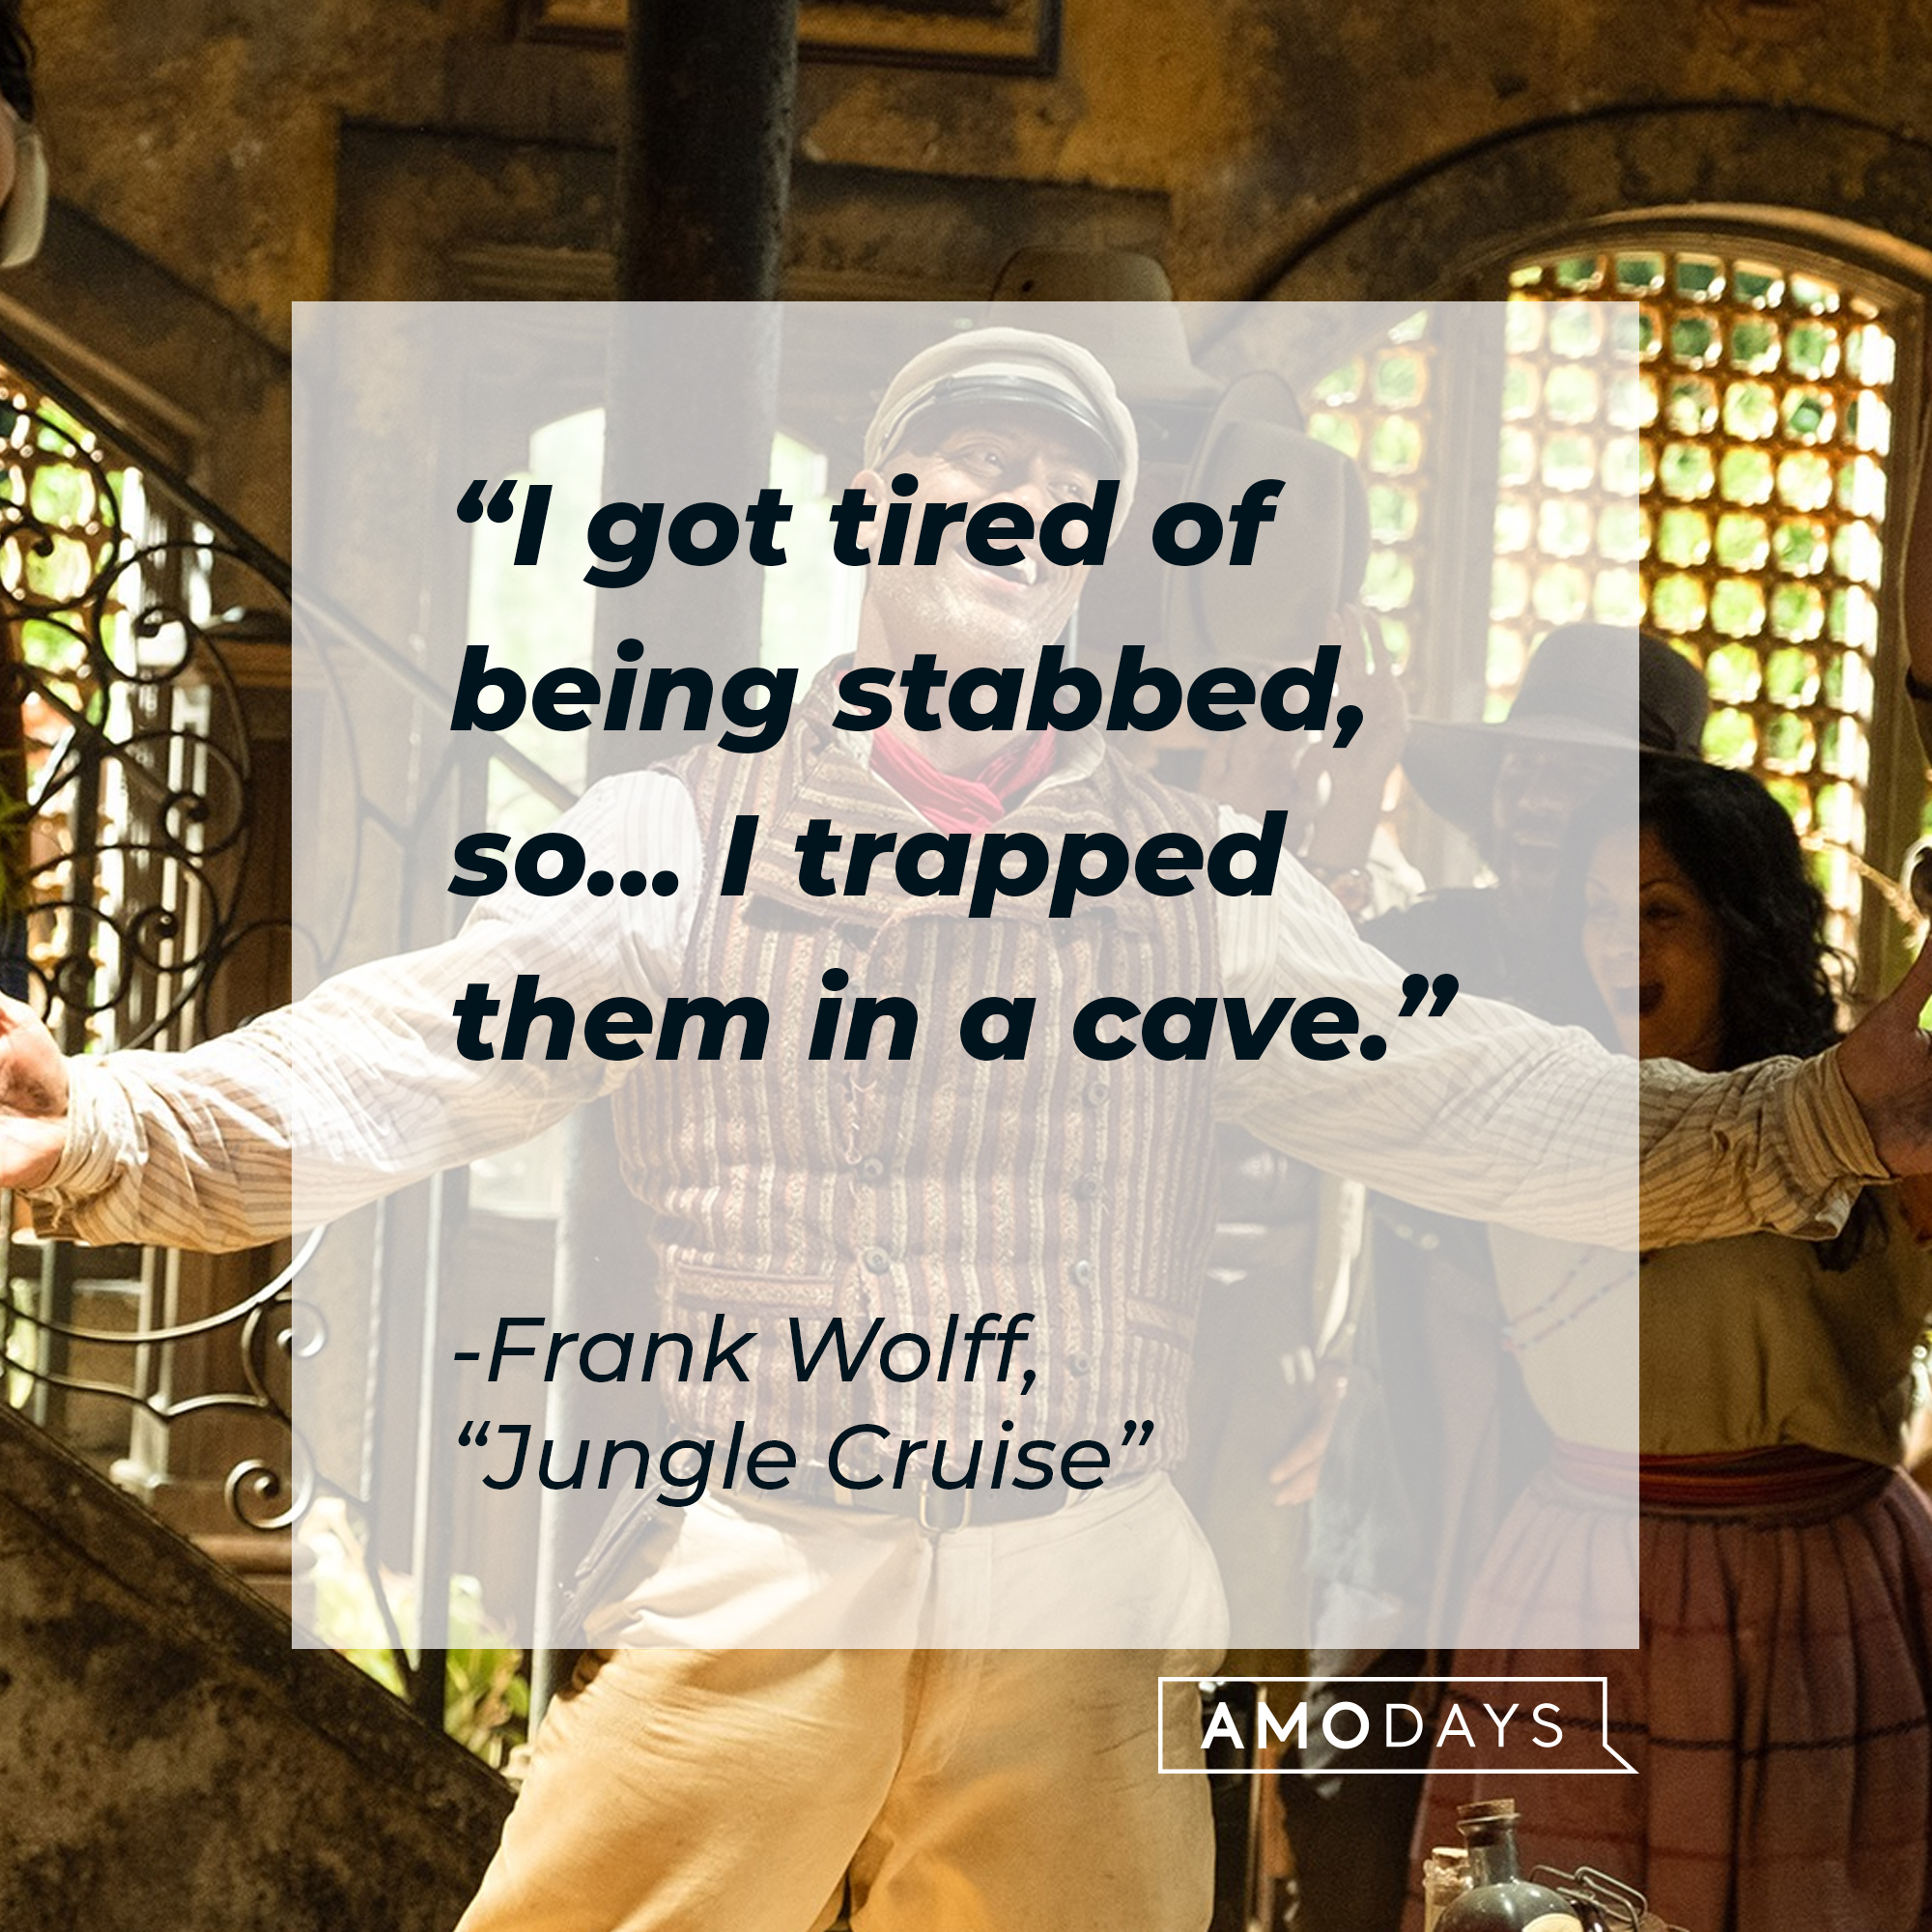 Frank Wolff’s quote: "I got tired of being stabbed, so... I trapped them in a cave." | Image: facebook.com/JungleCruise